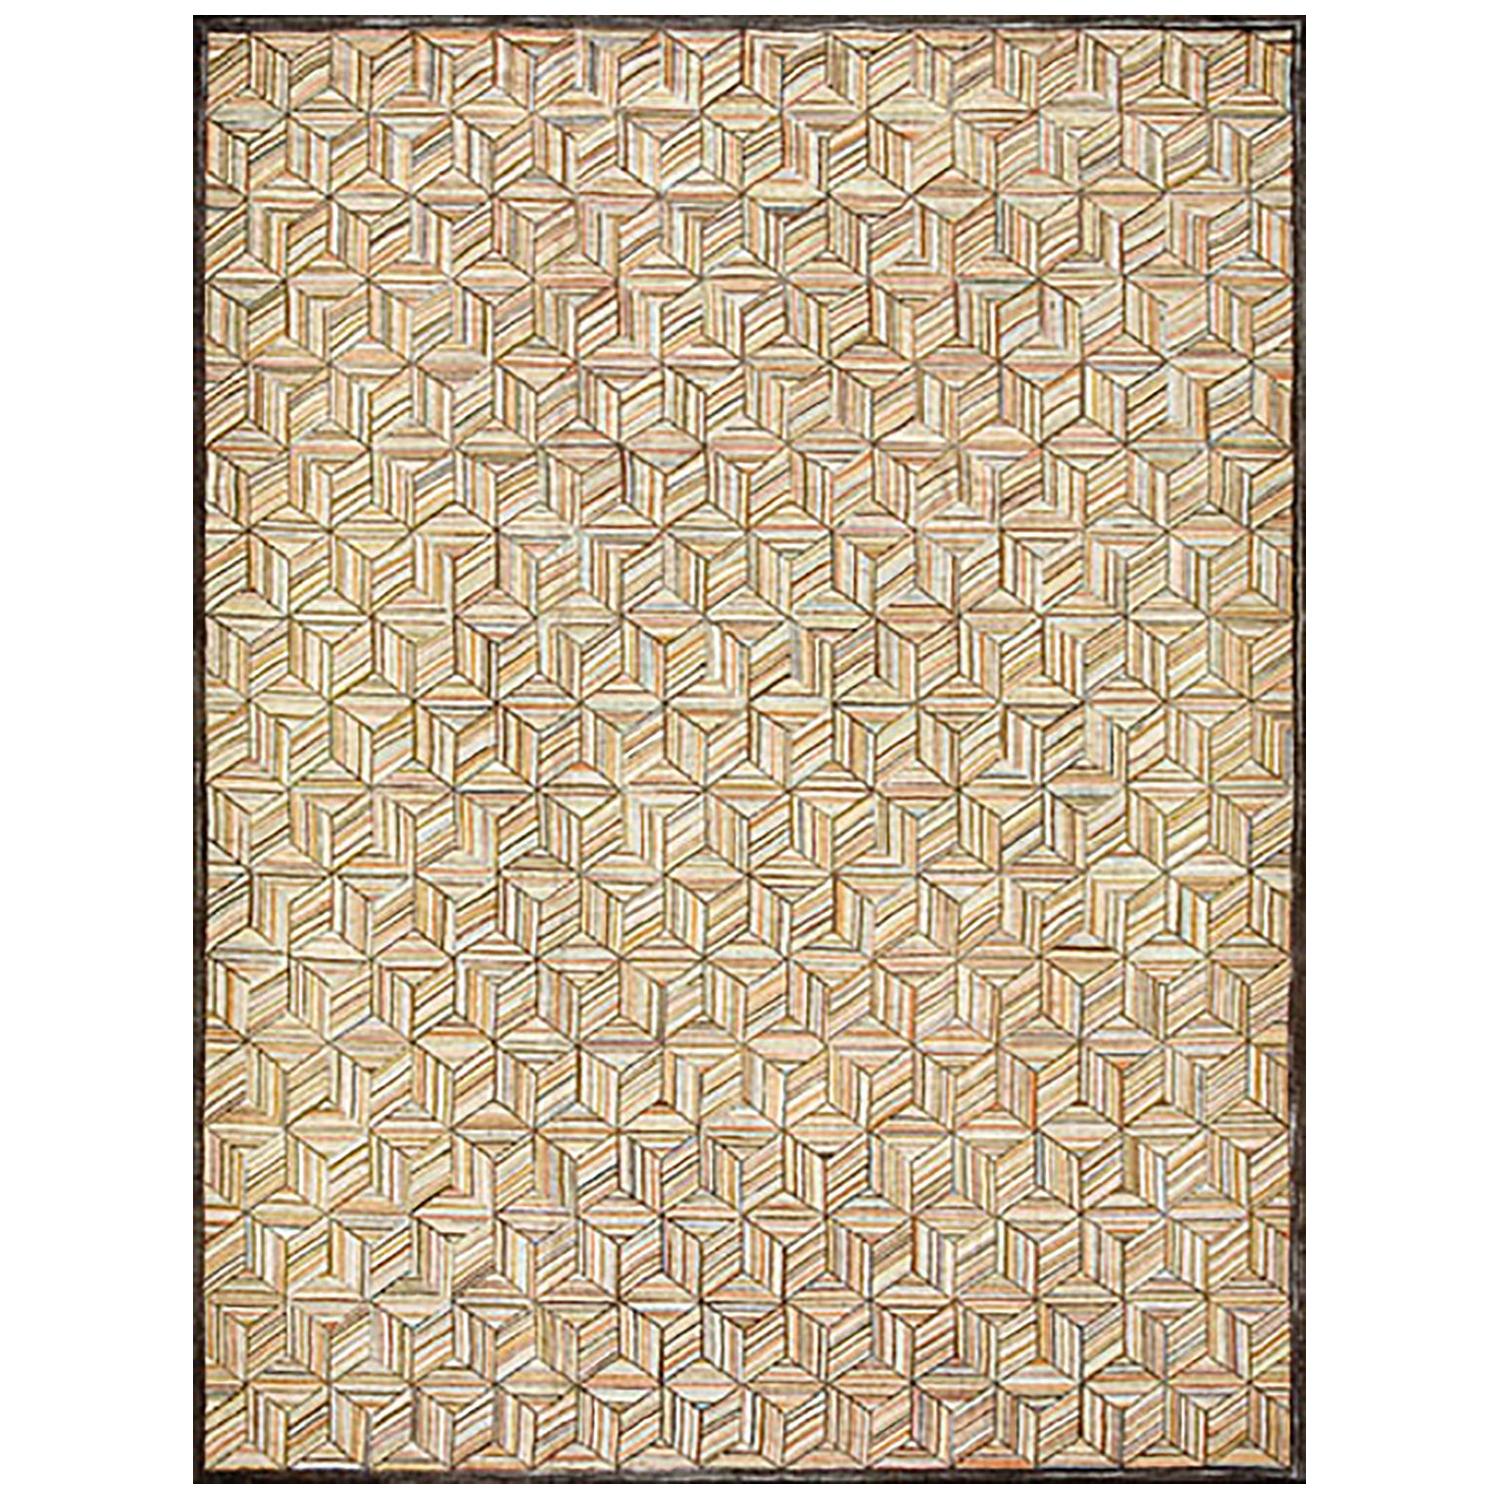 Contemporary American Hooked Rug (9' x 12' - 274 x 365 )